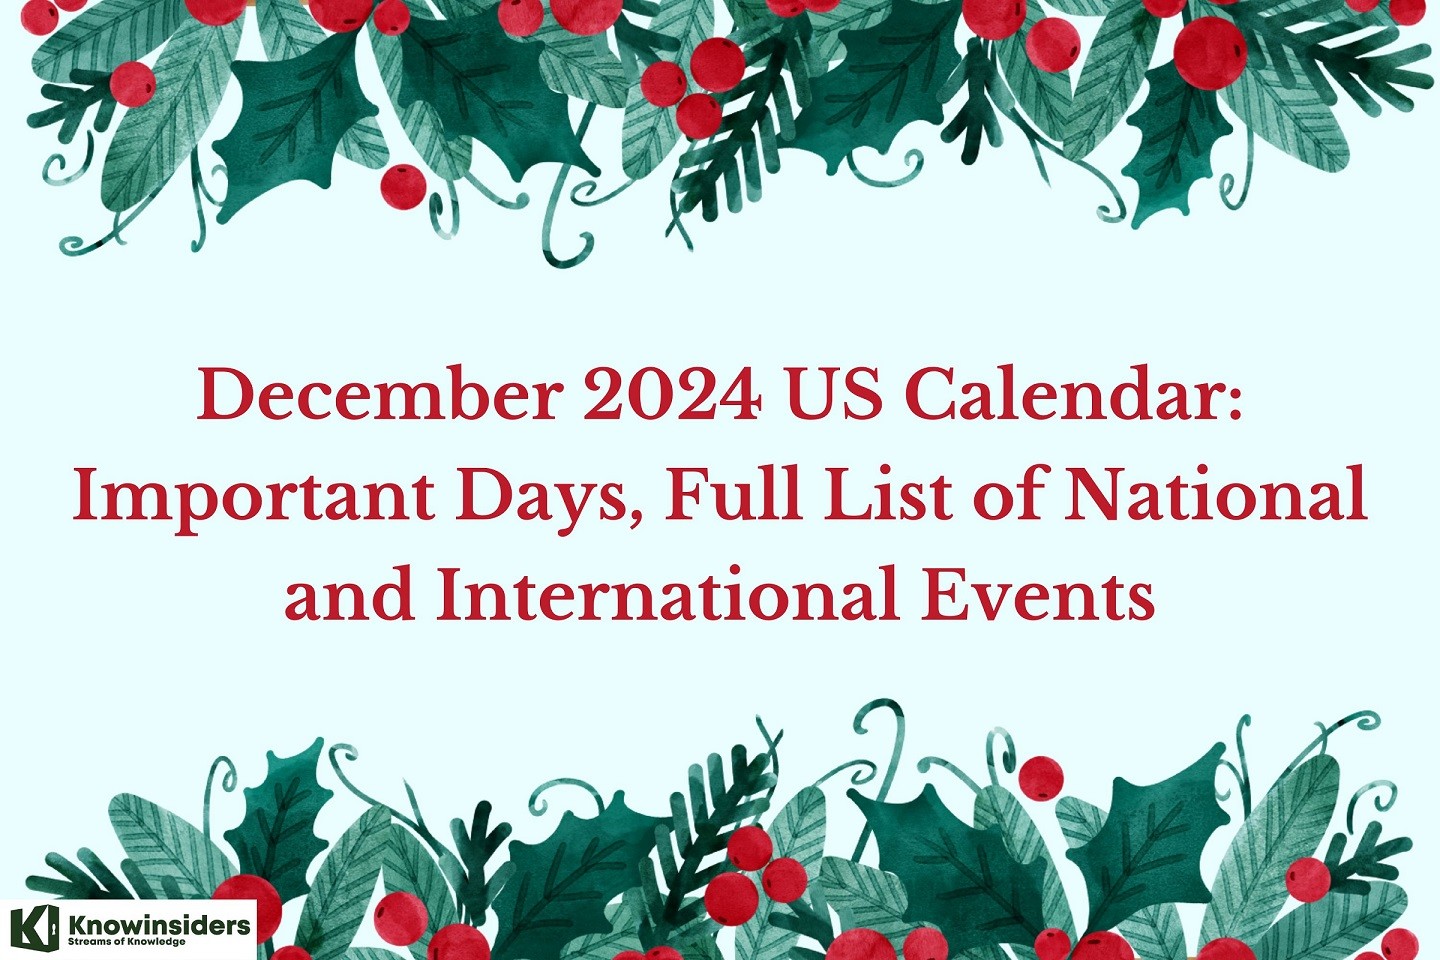 December 2024 US Calendar: Important Days, Full List of National and International Events